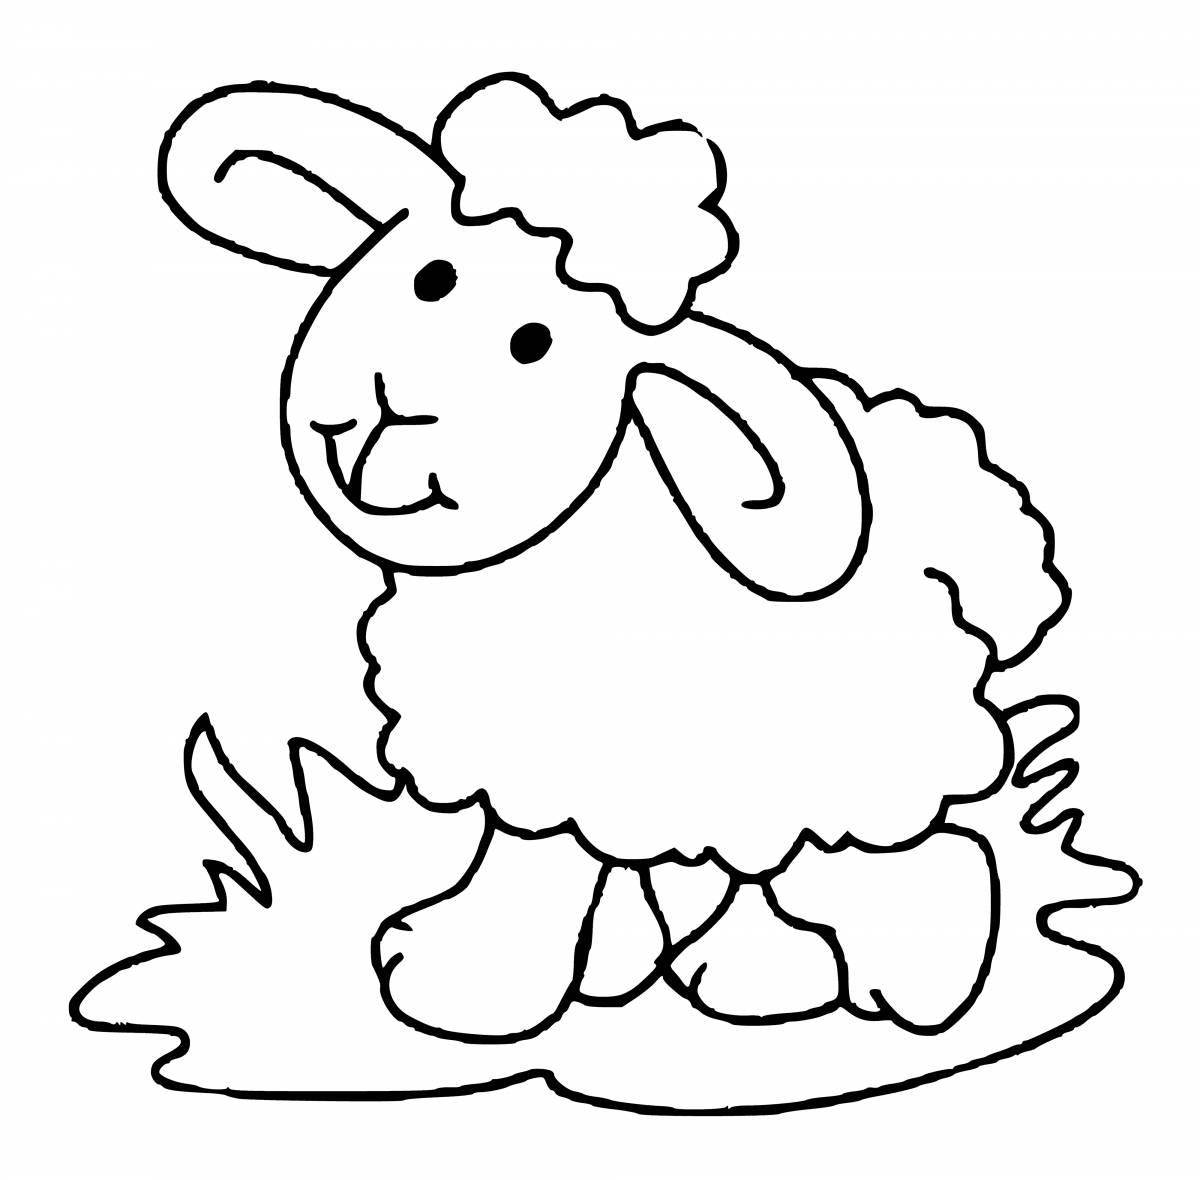 Dazzling sheep coloring book for 3-4 year olds